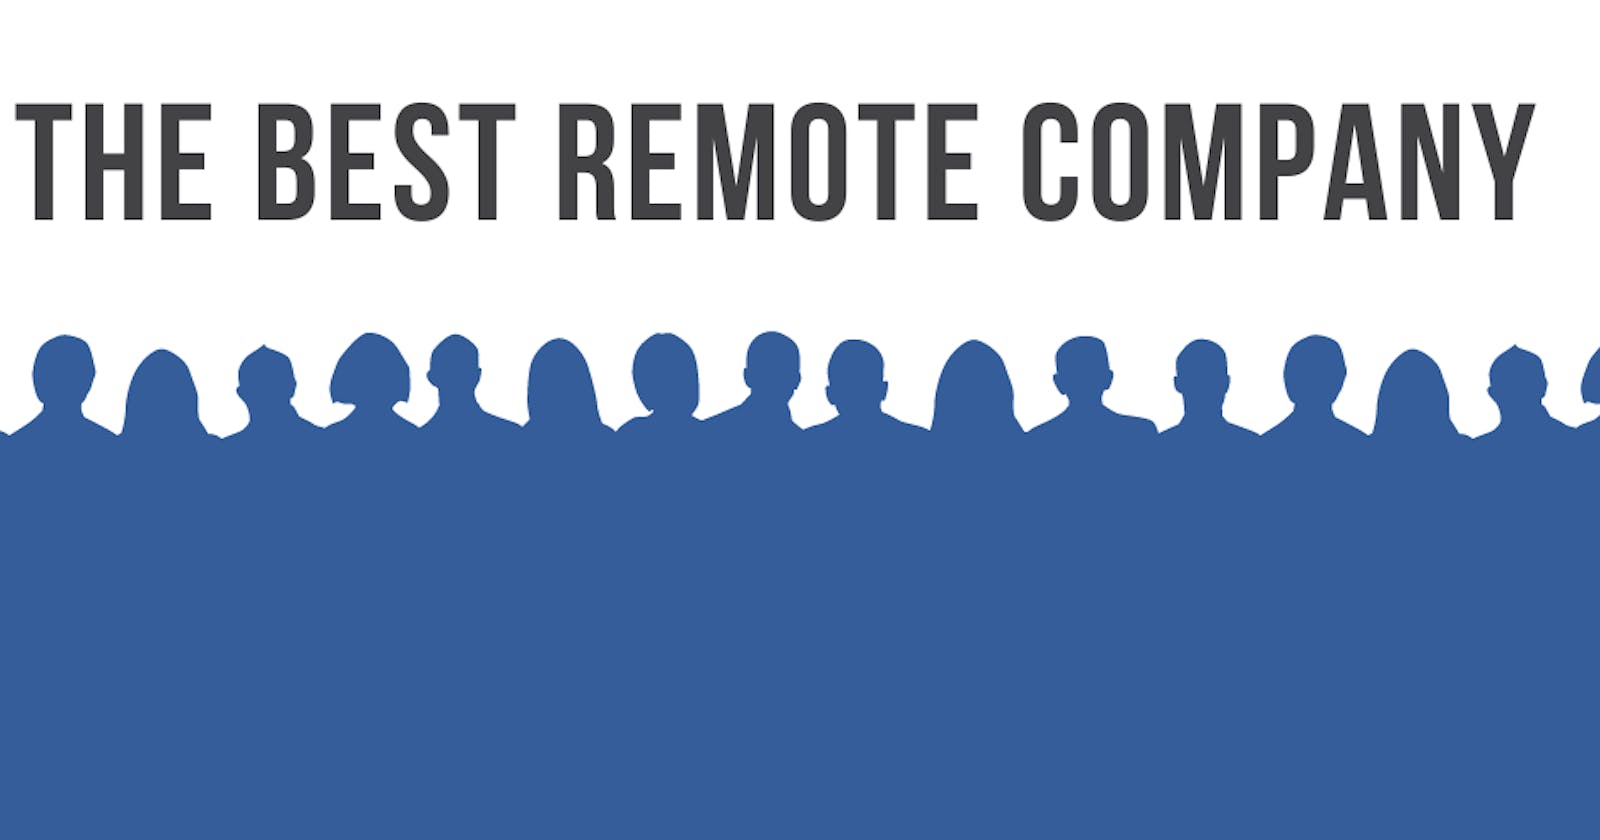 The best remote company of 2021